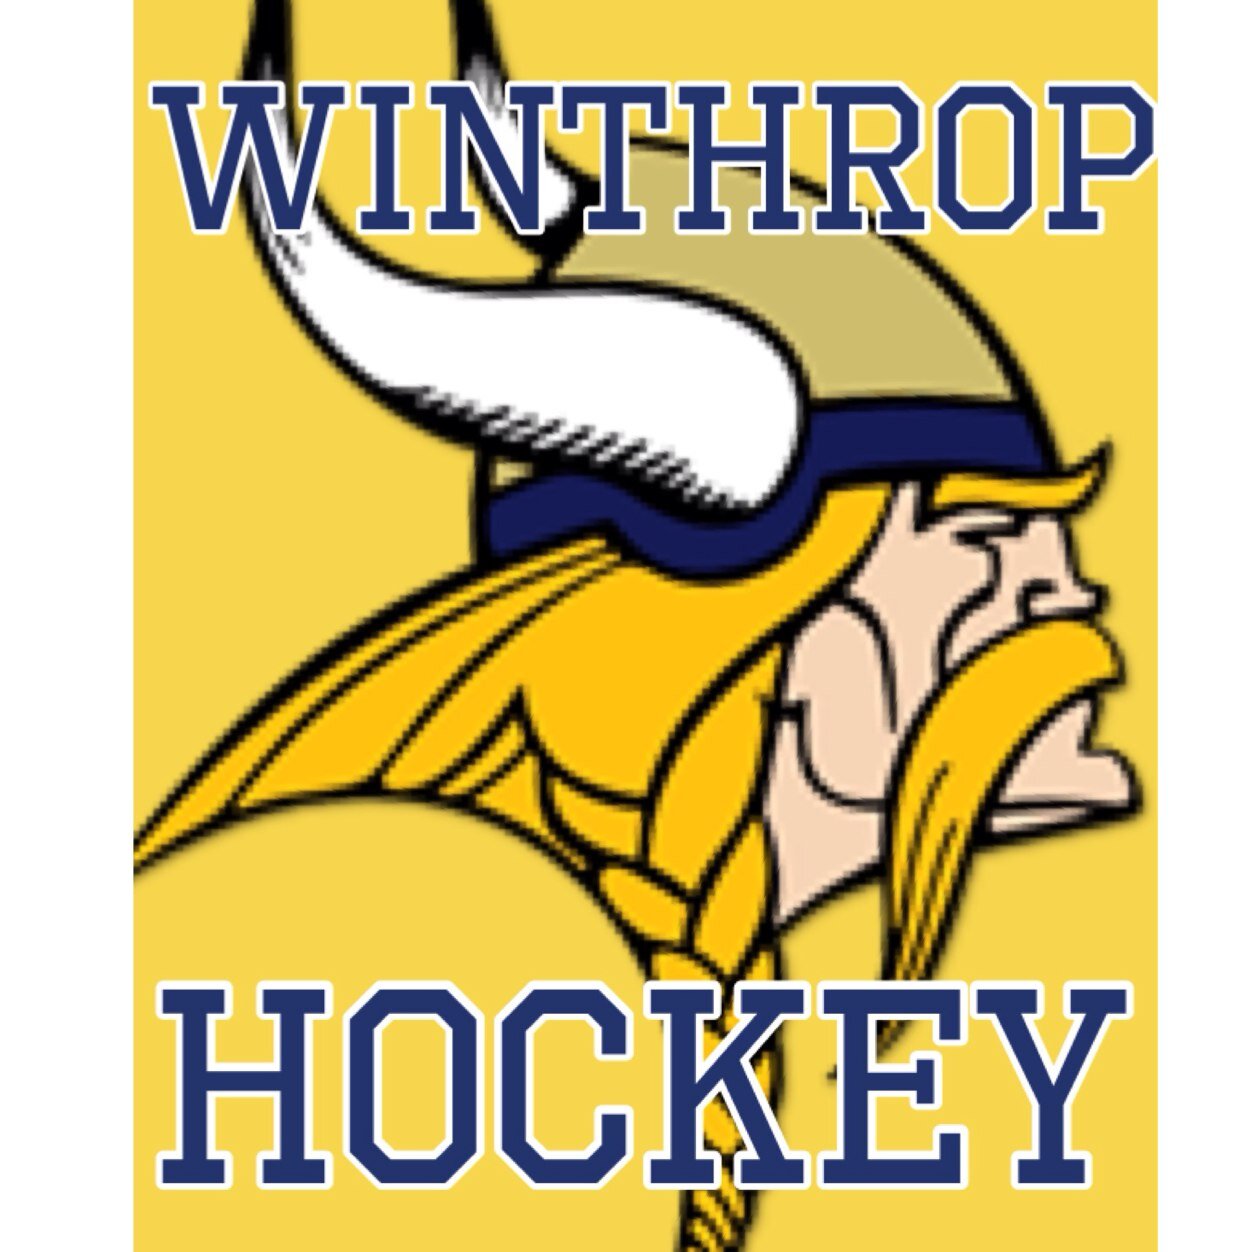 Official Twitter for your 2019-2020 Winthrop Vikings #VikingPride #WelcomeToTheJungle